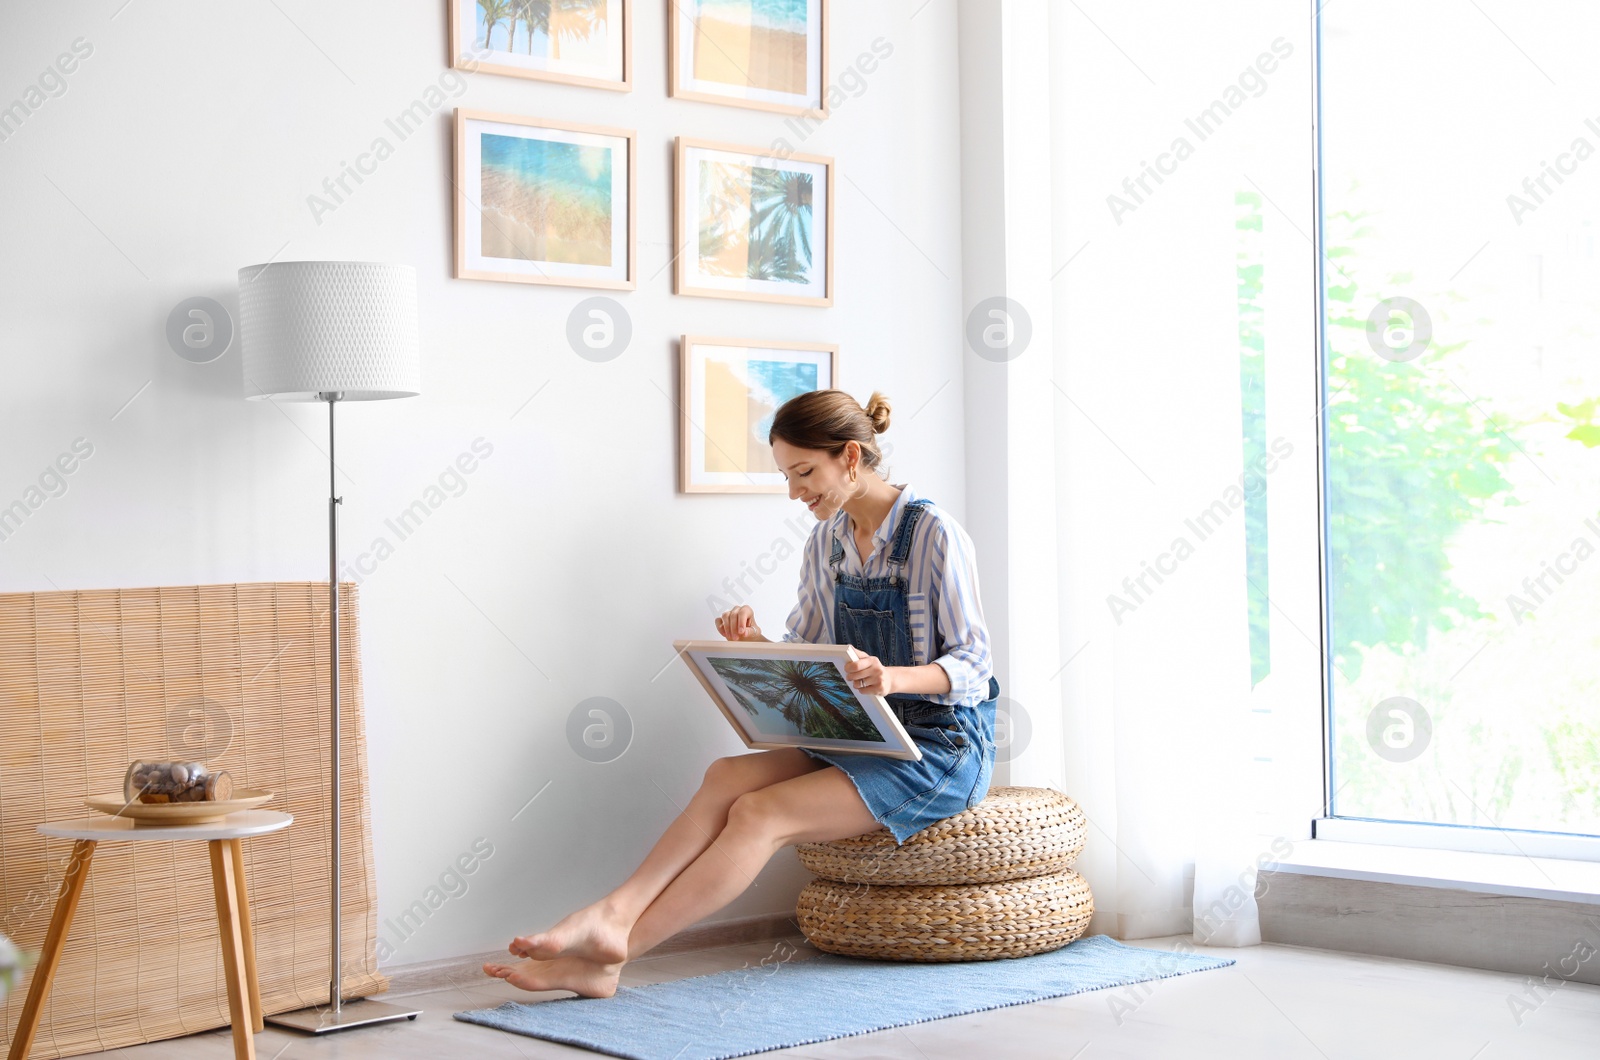 Photo of Female interior designer decorating white wall with pictures indoors